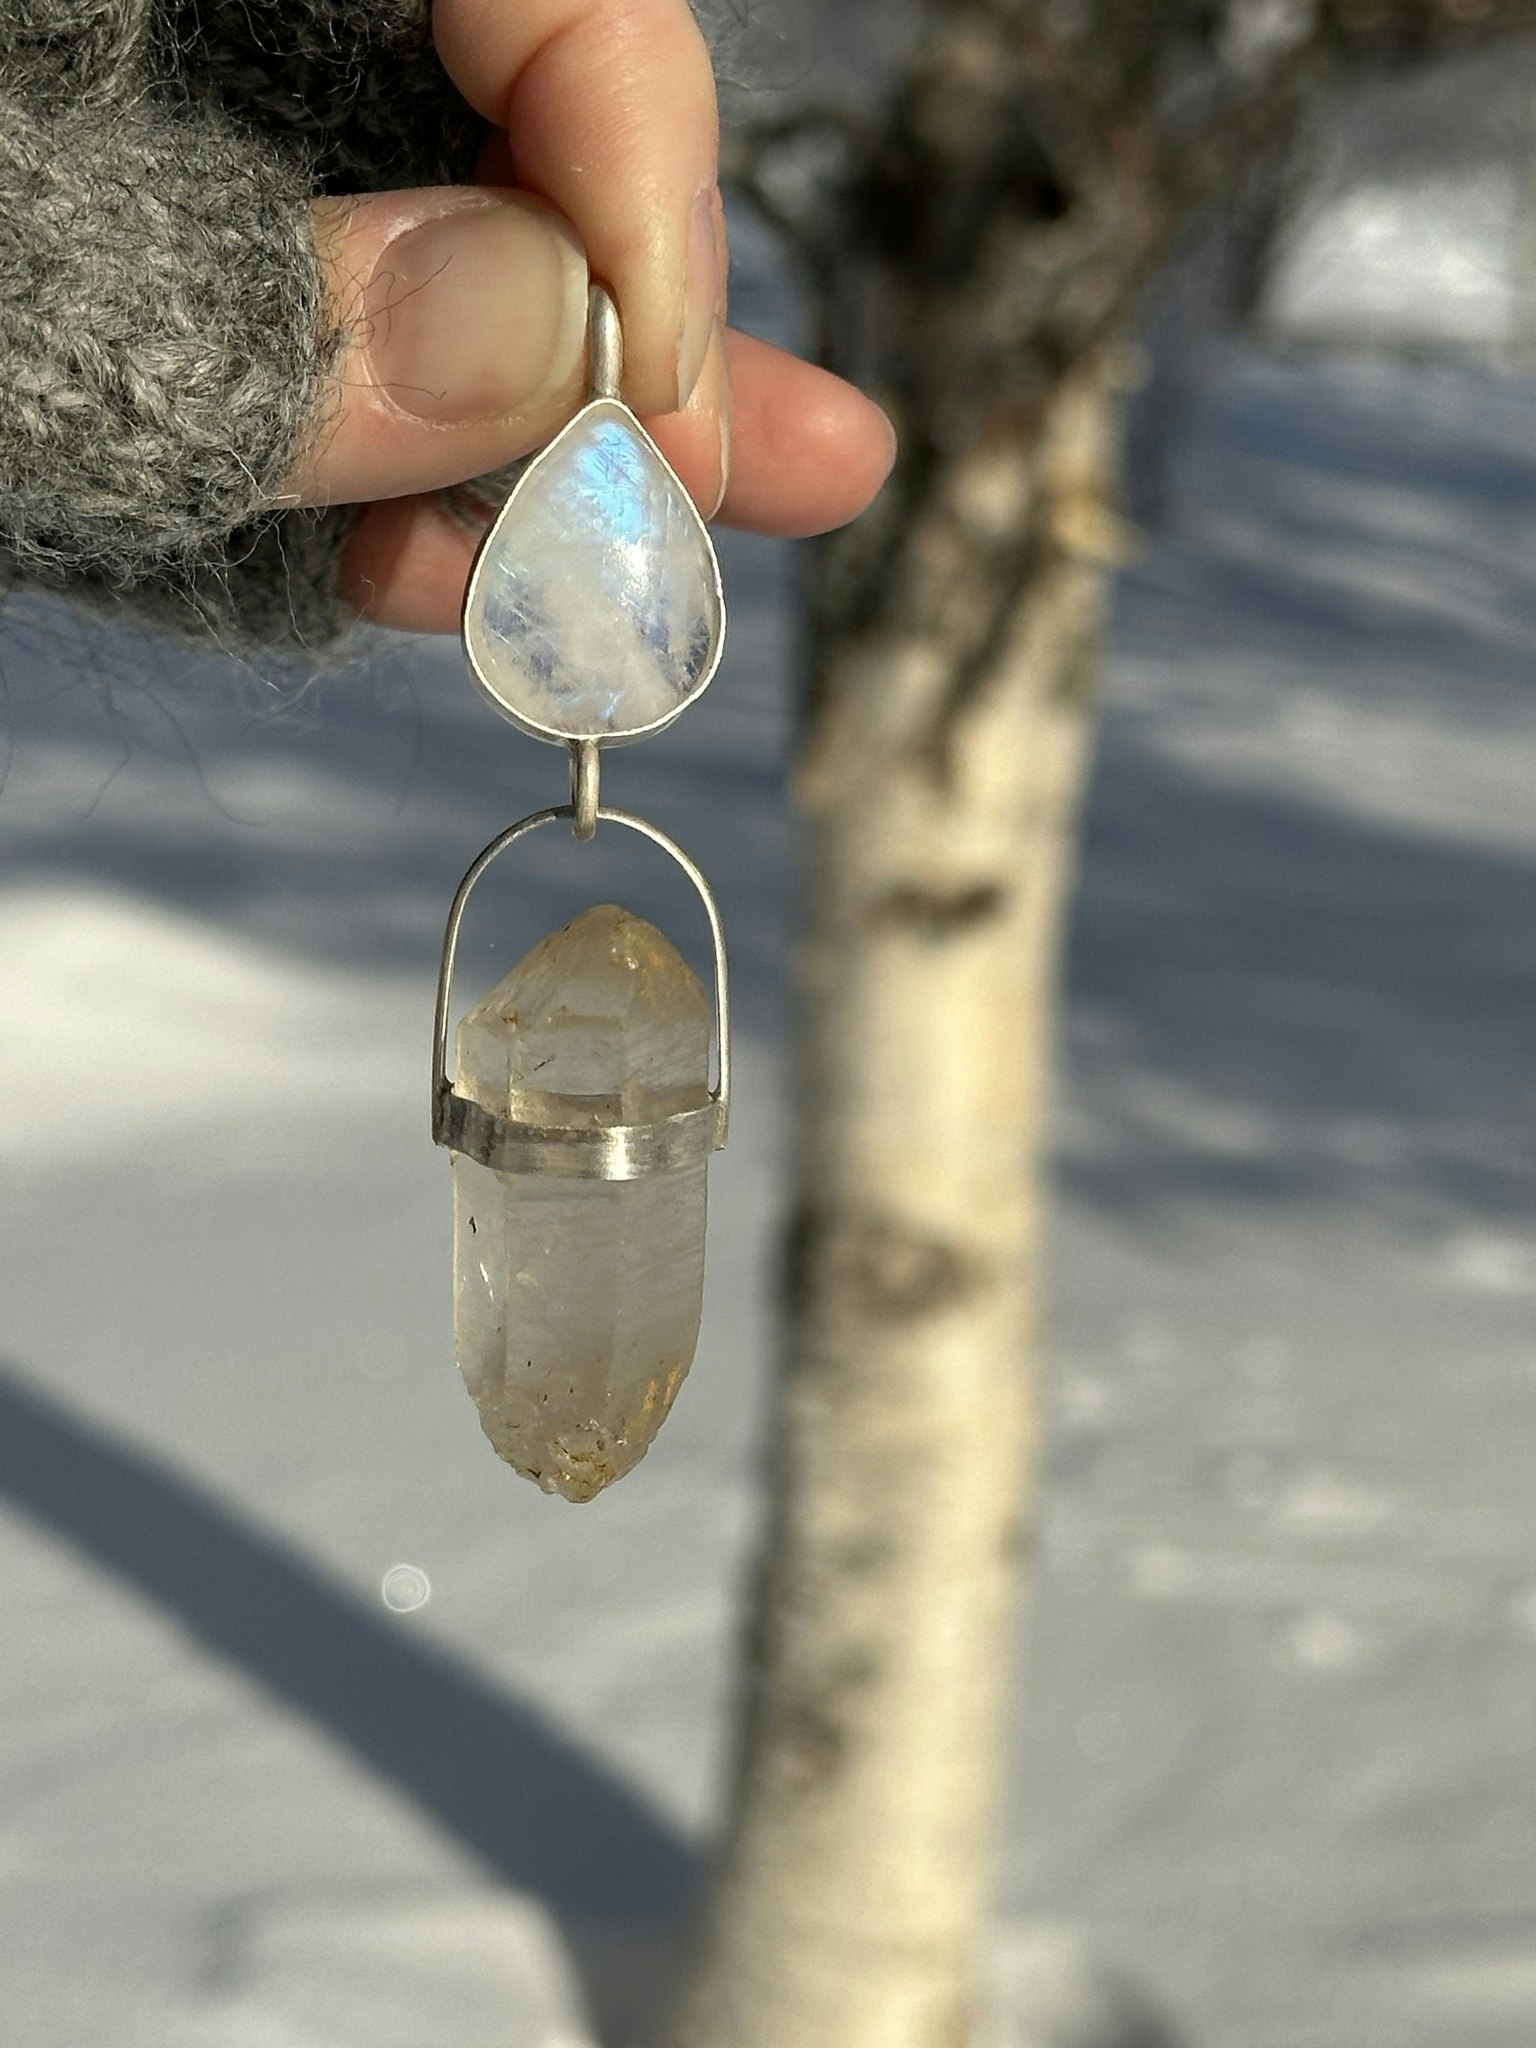 Rainbow moonstone with double-terminated quartz crystal from Sweden